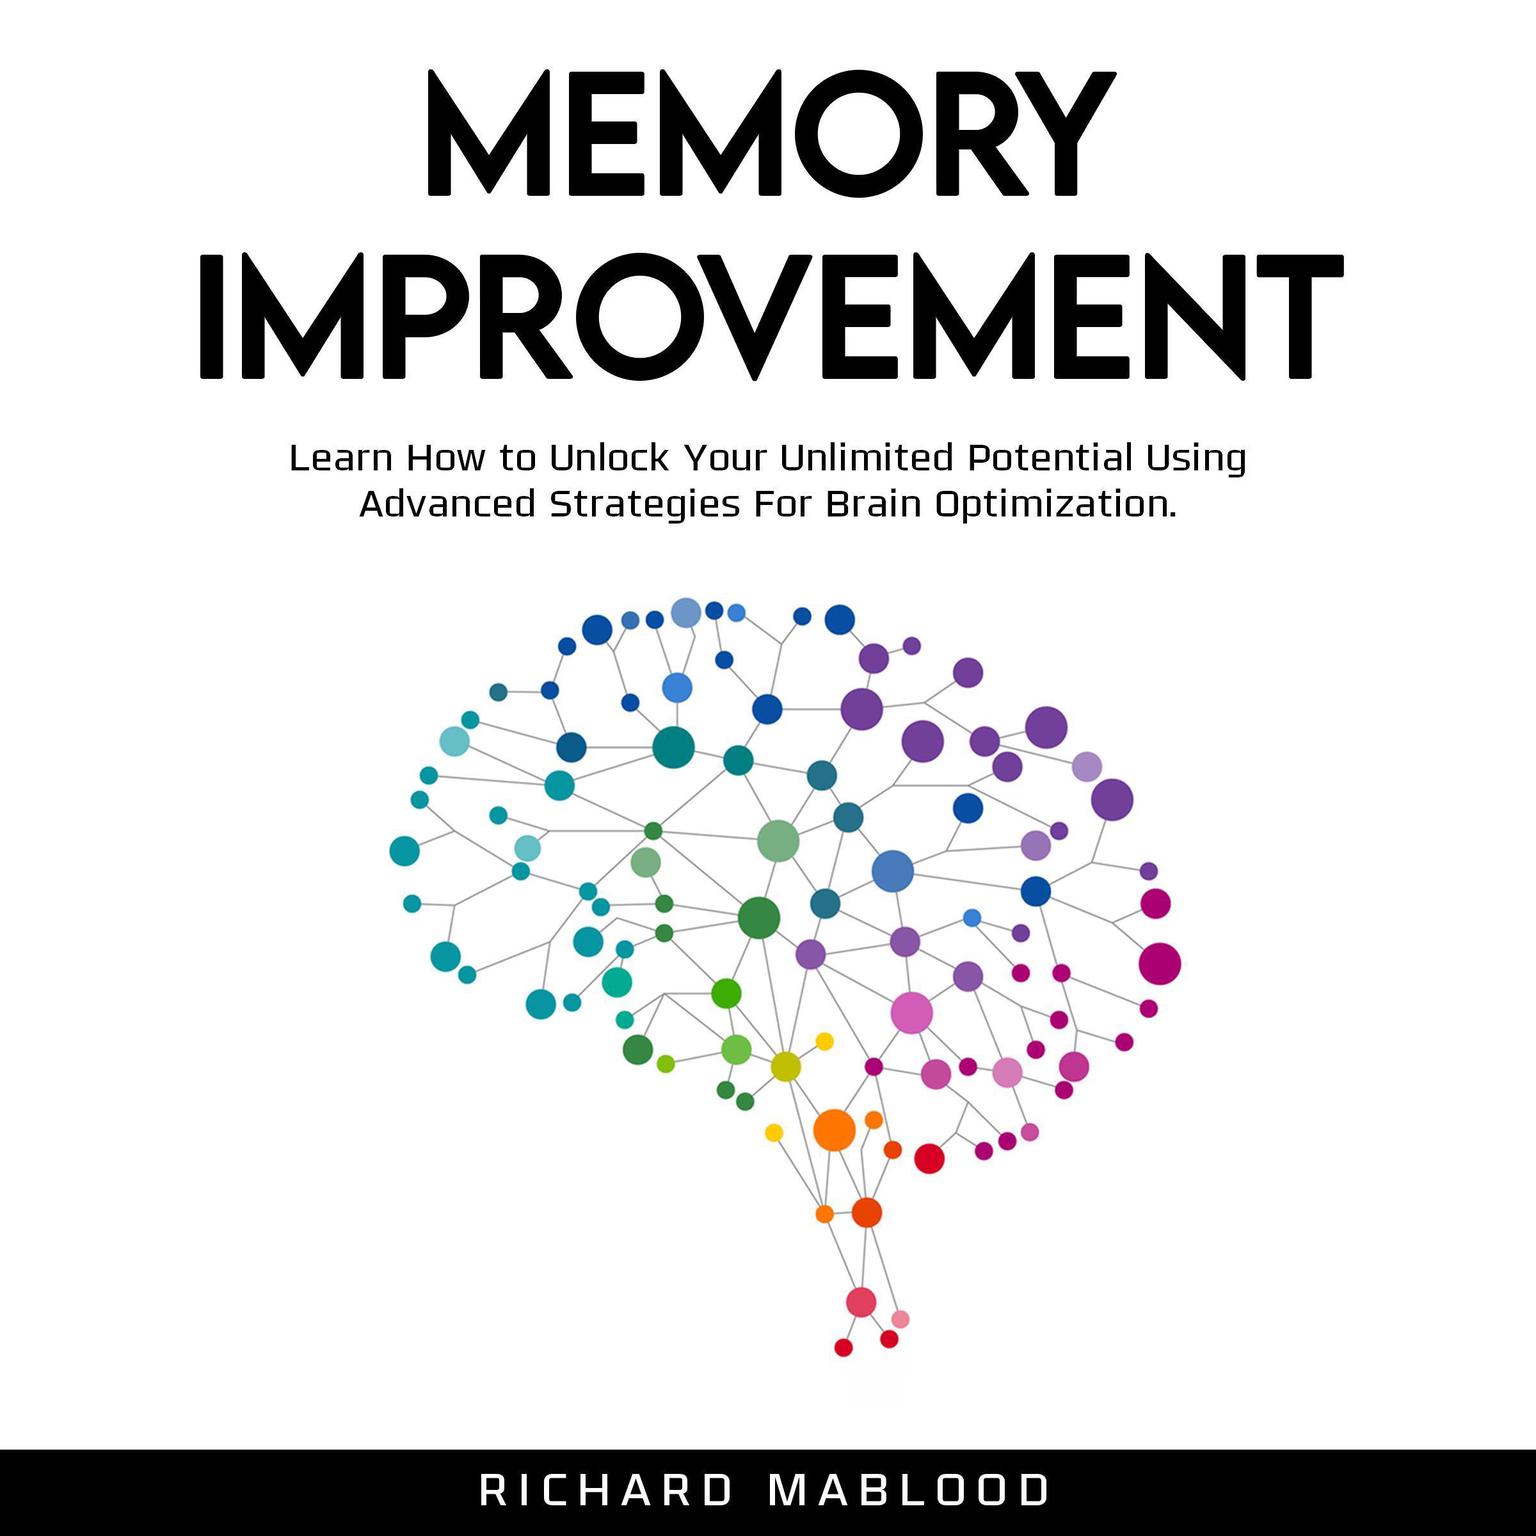 Memory Improvement: Learn How to Unlock You Unlimited Potential Using Advanced Strategies for Brain Optimization Audiobook, by Richard Mablood